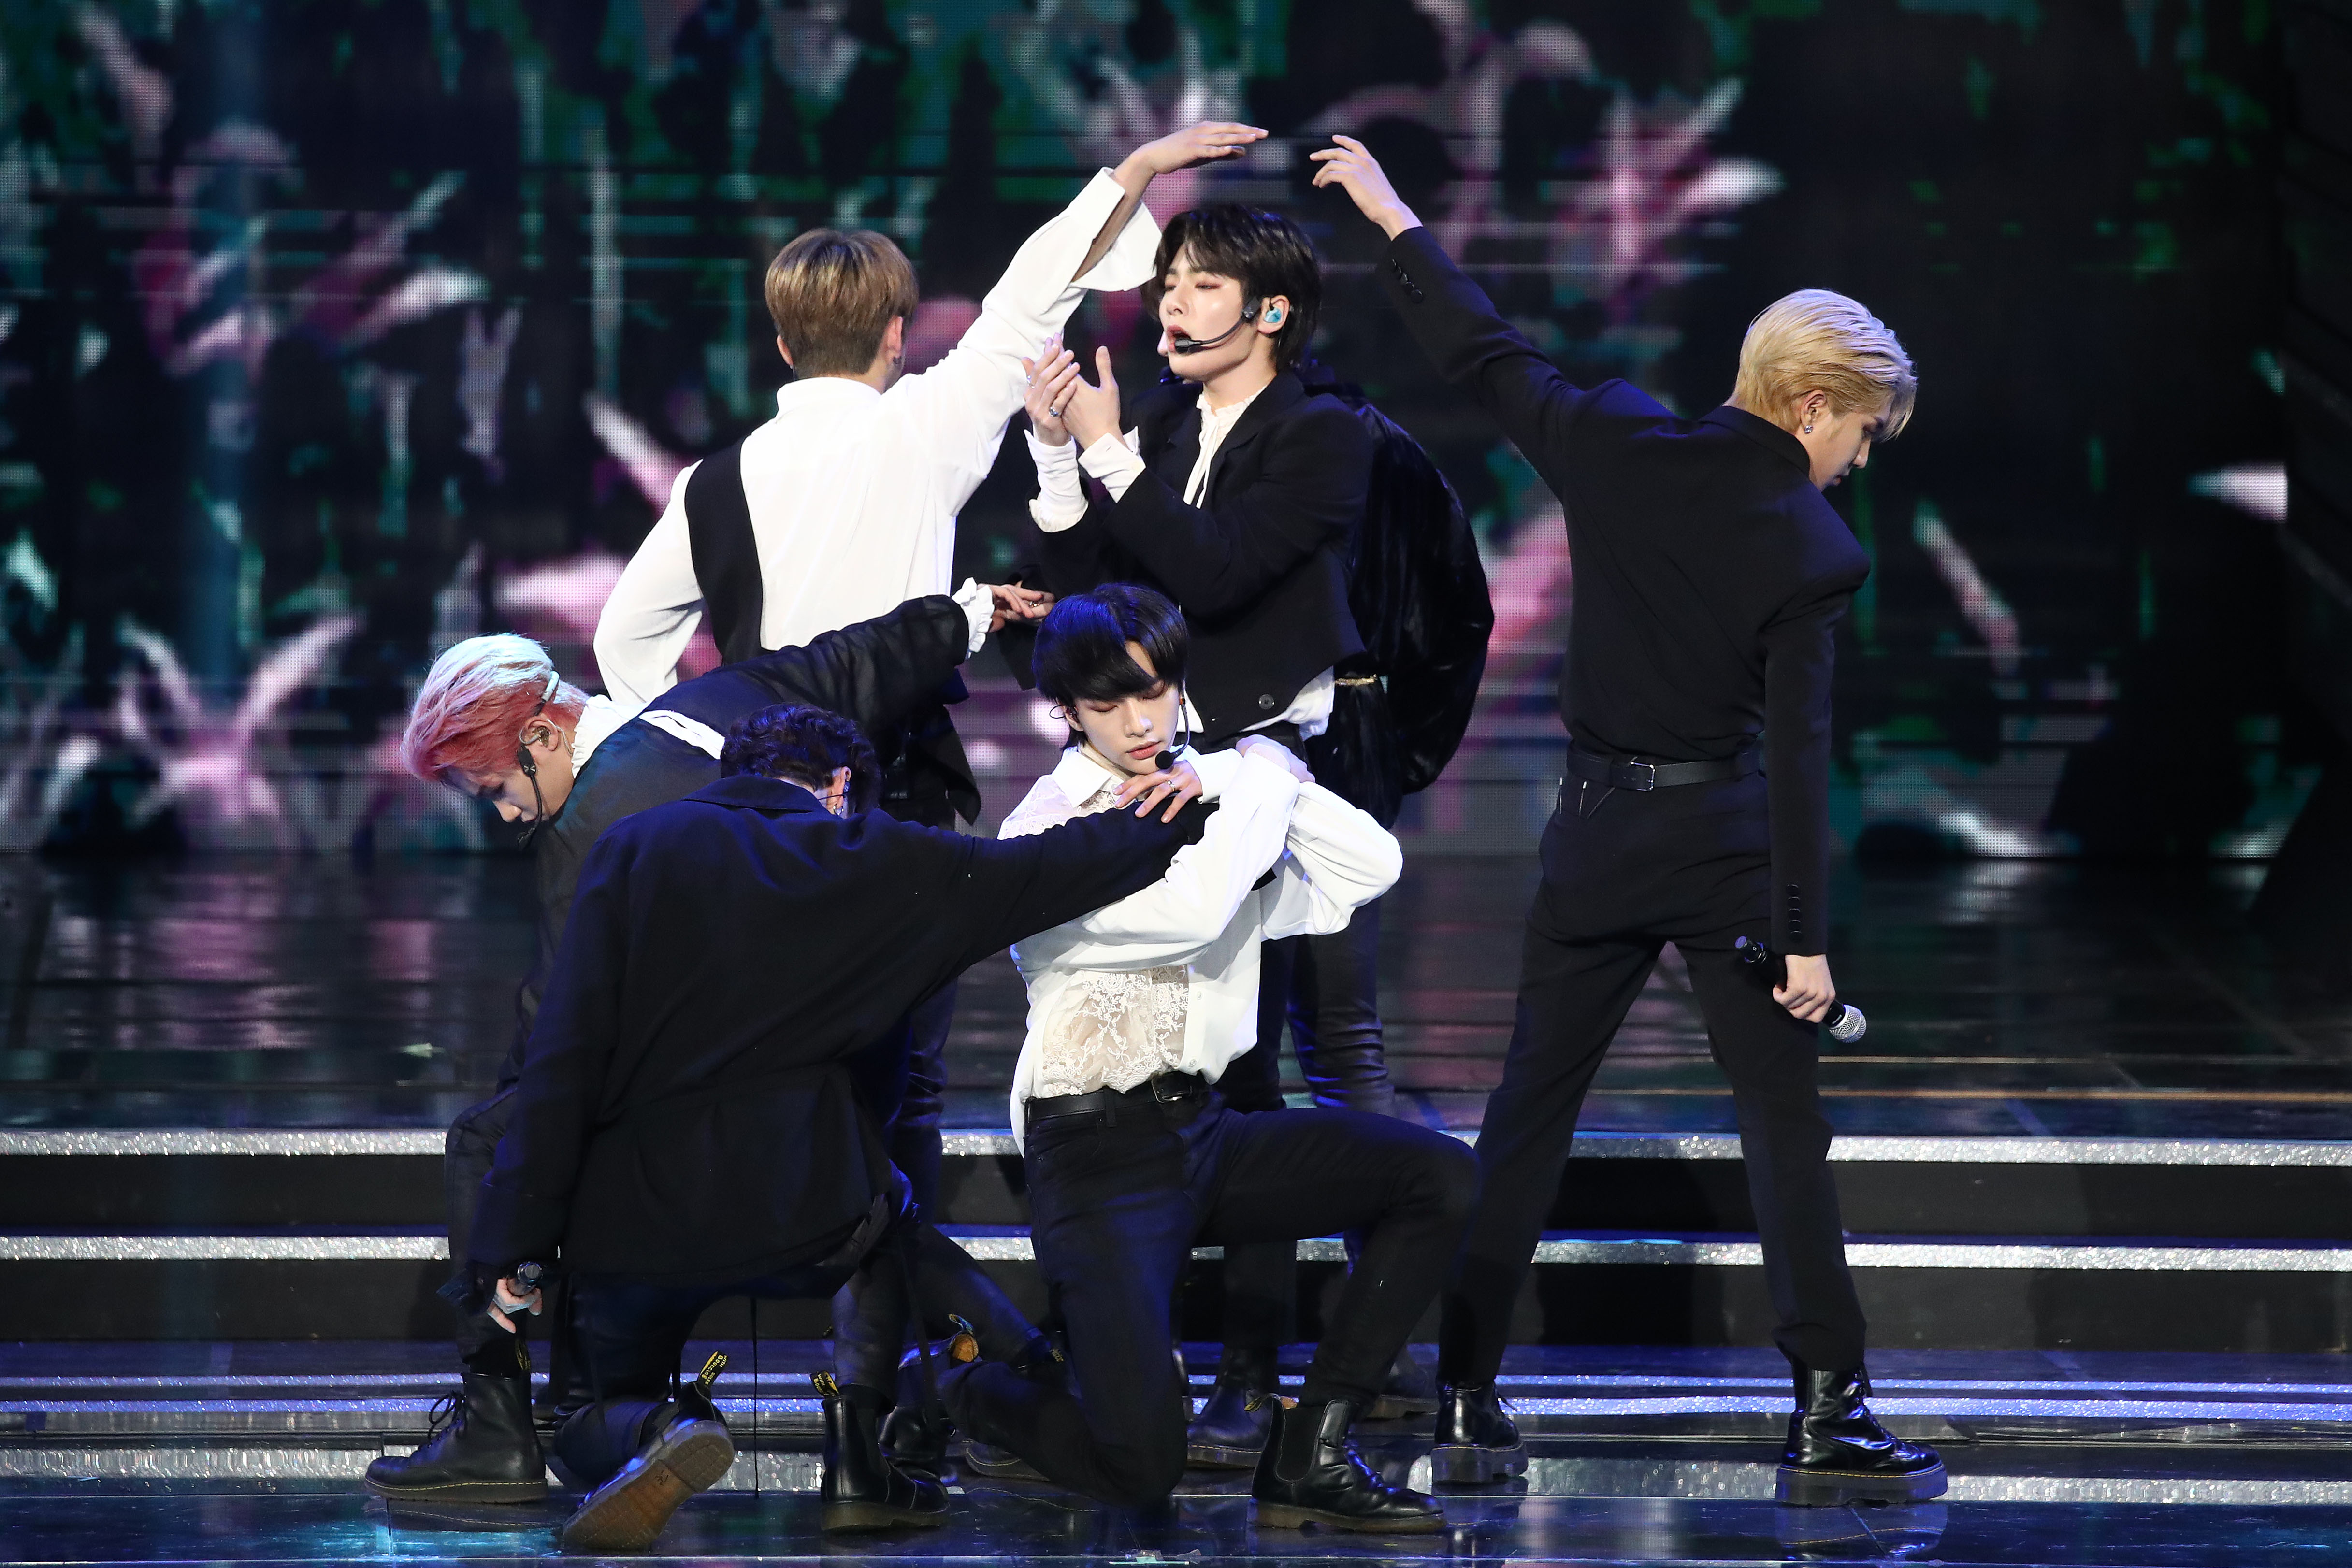 Boy band Stray Kids perform on stage during the 9th Gaon Chart K-Pop Awards